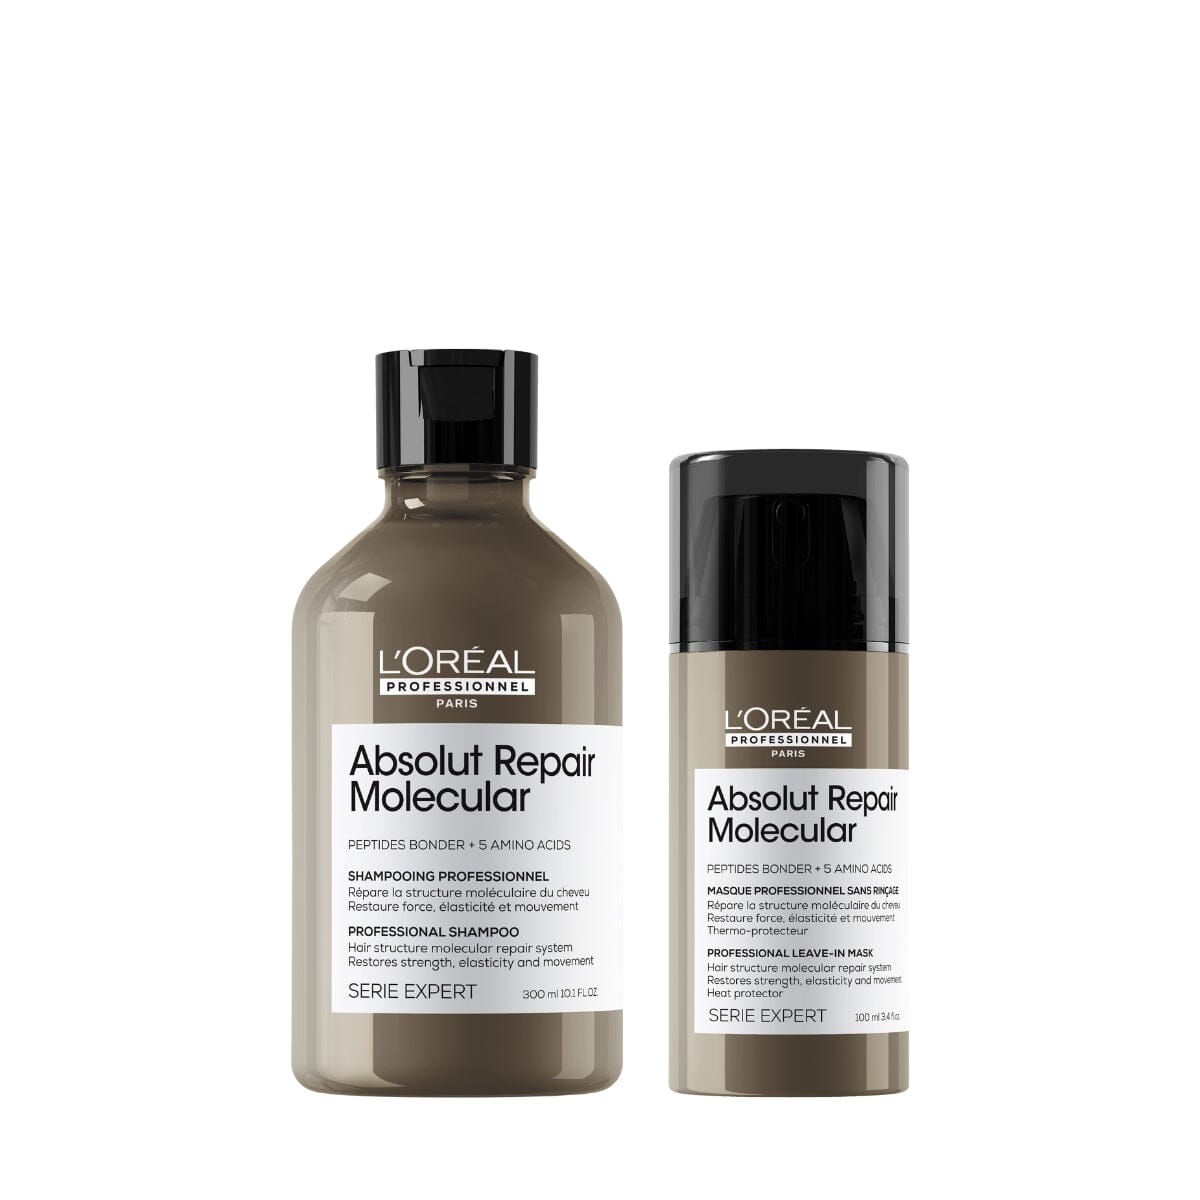 L'Oreal Serie Expert Absolut Repair Molecular Shampoo & Leave-in Mask Duo